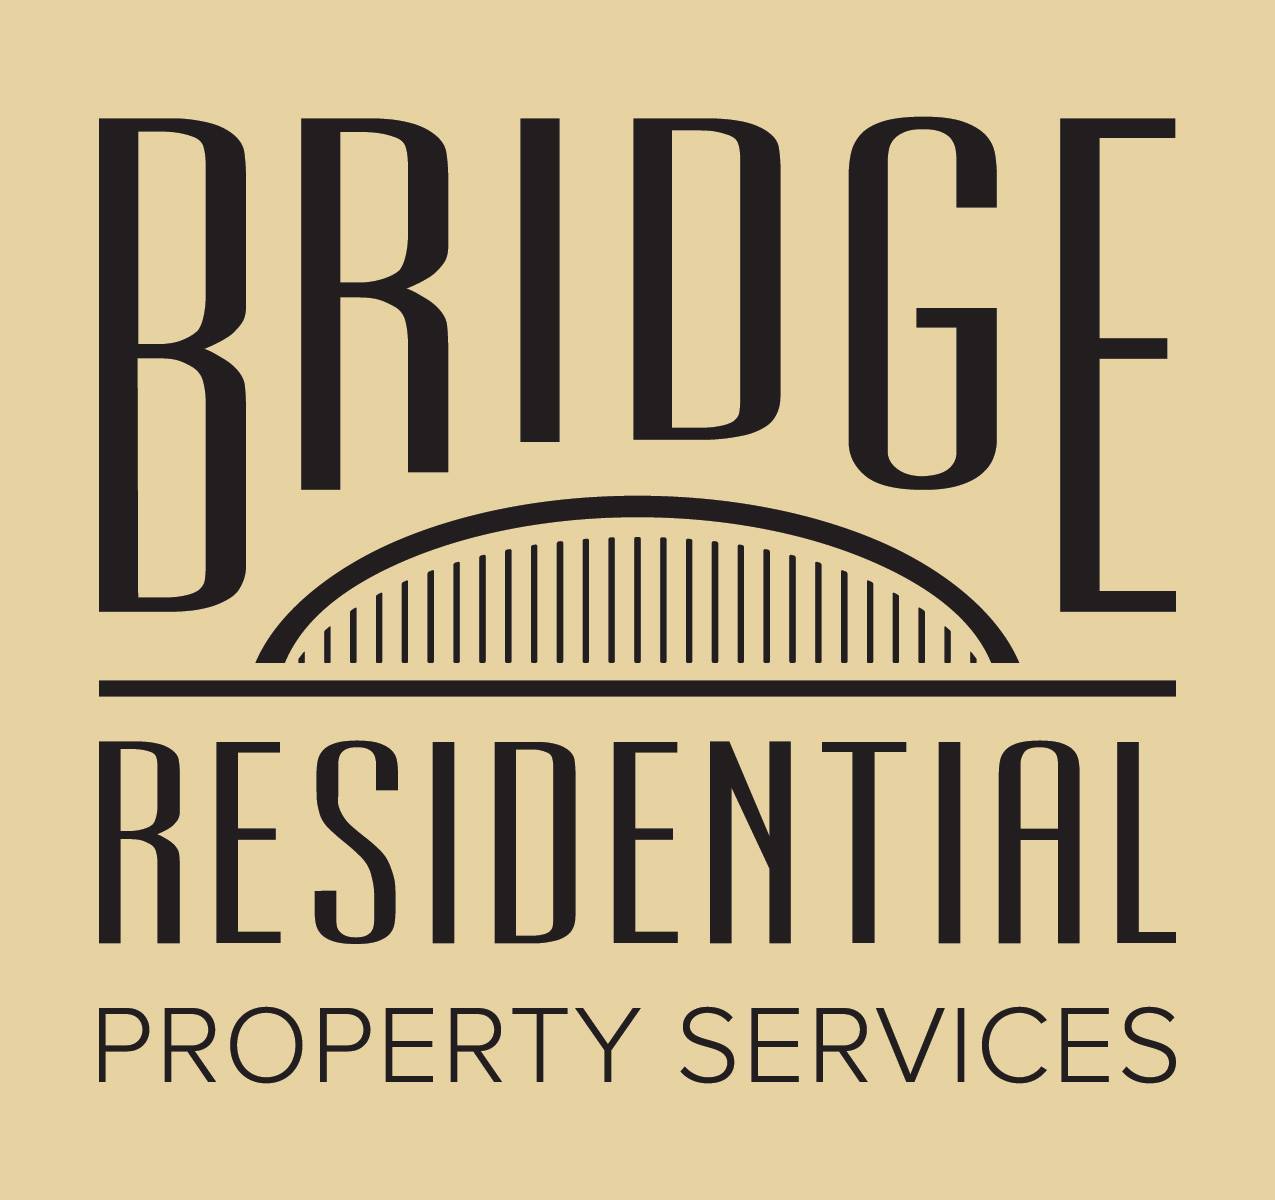 Business logo of Bridge Residential Property Services